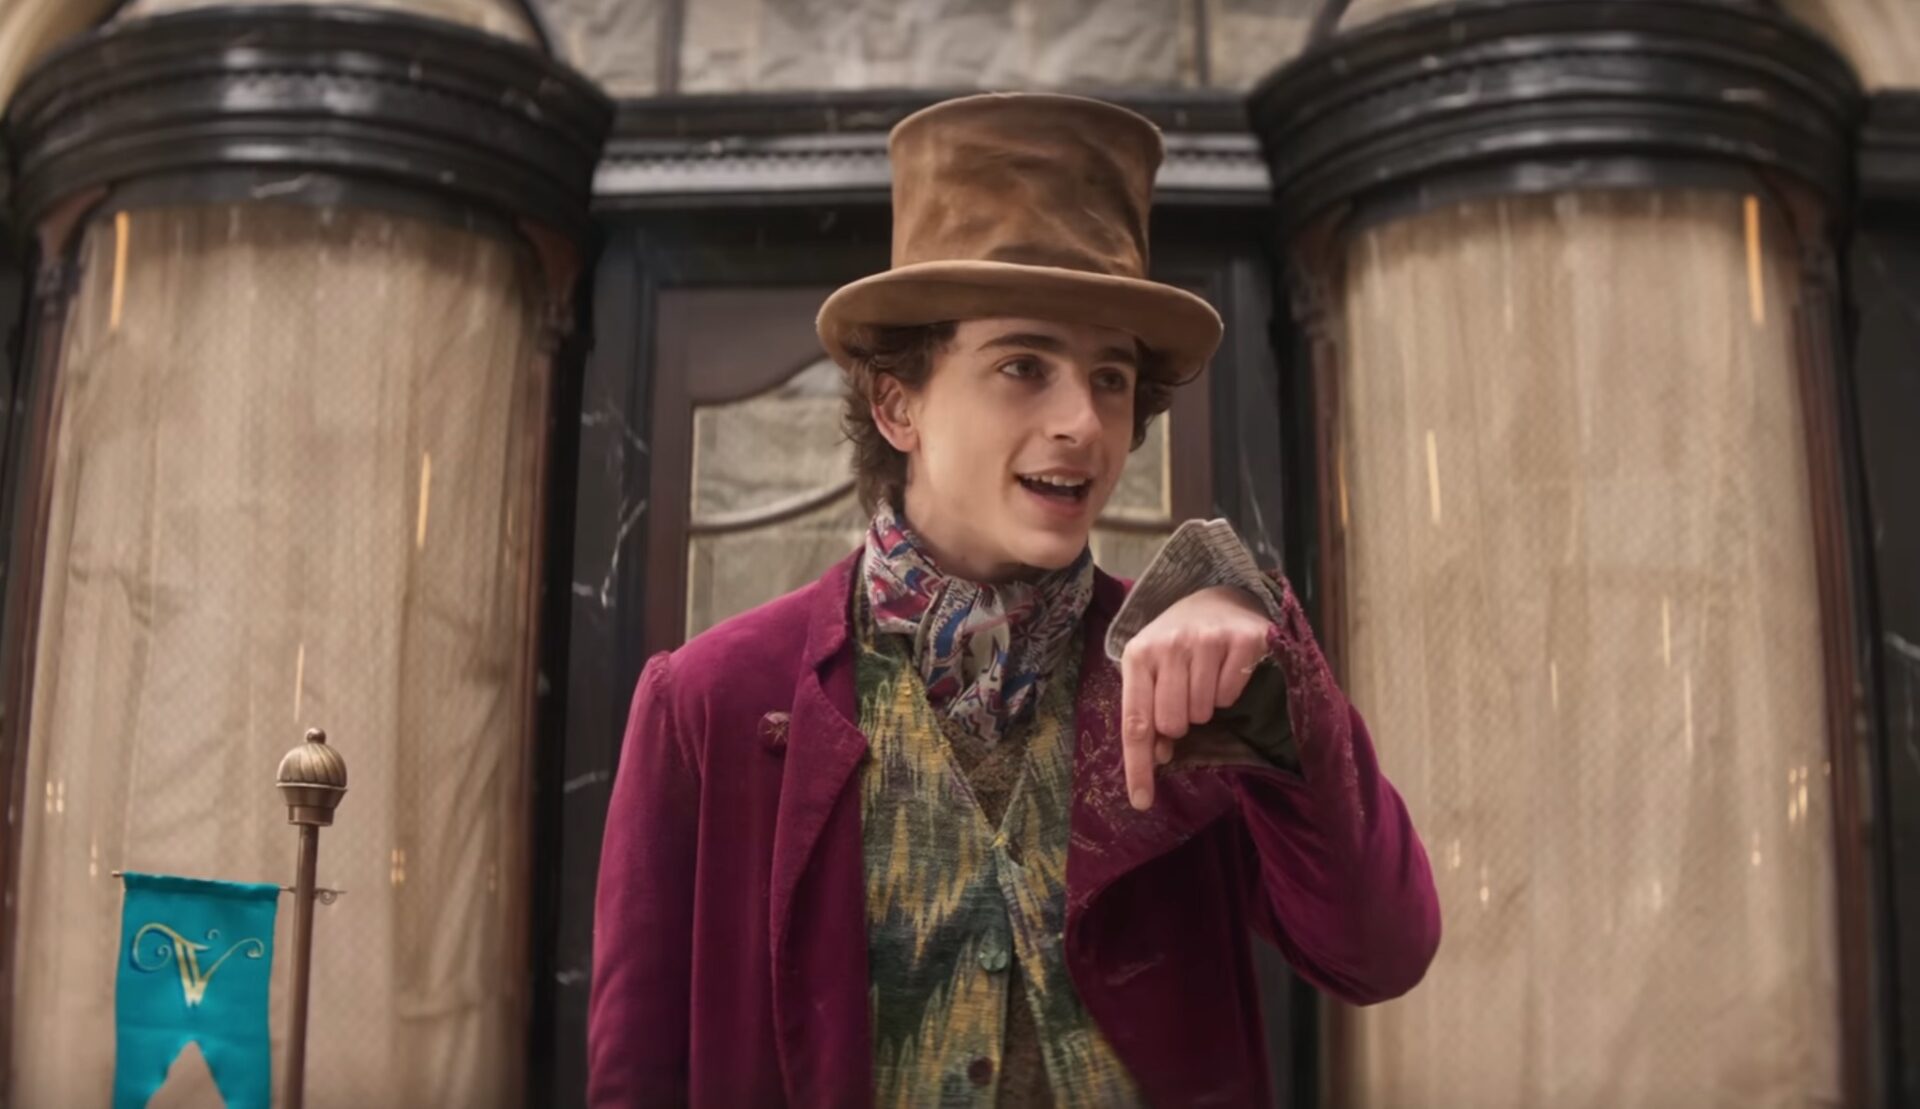 A Willy Wonka-inspired experience 'scam' was so bad that people